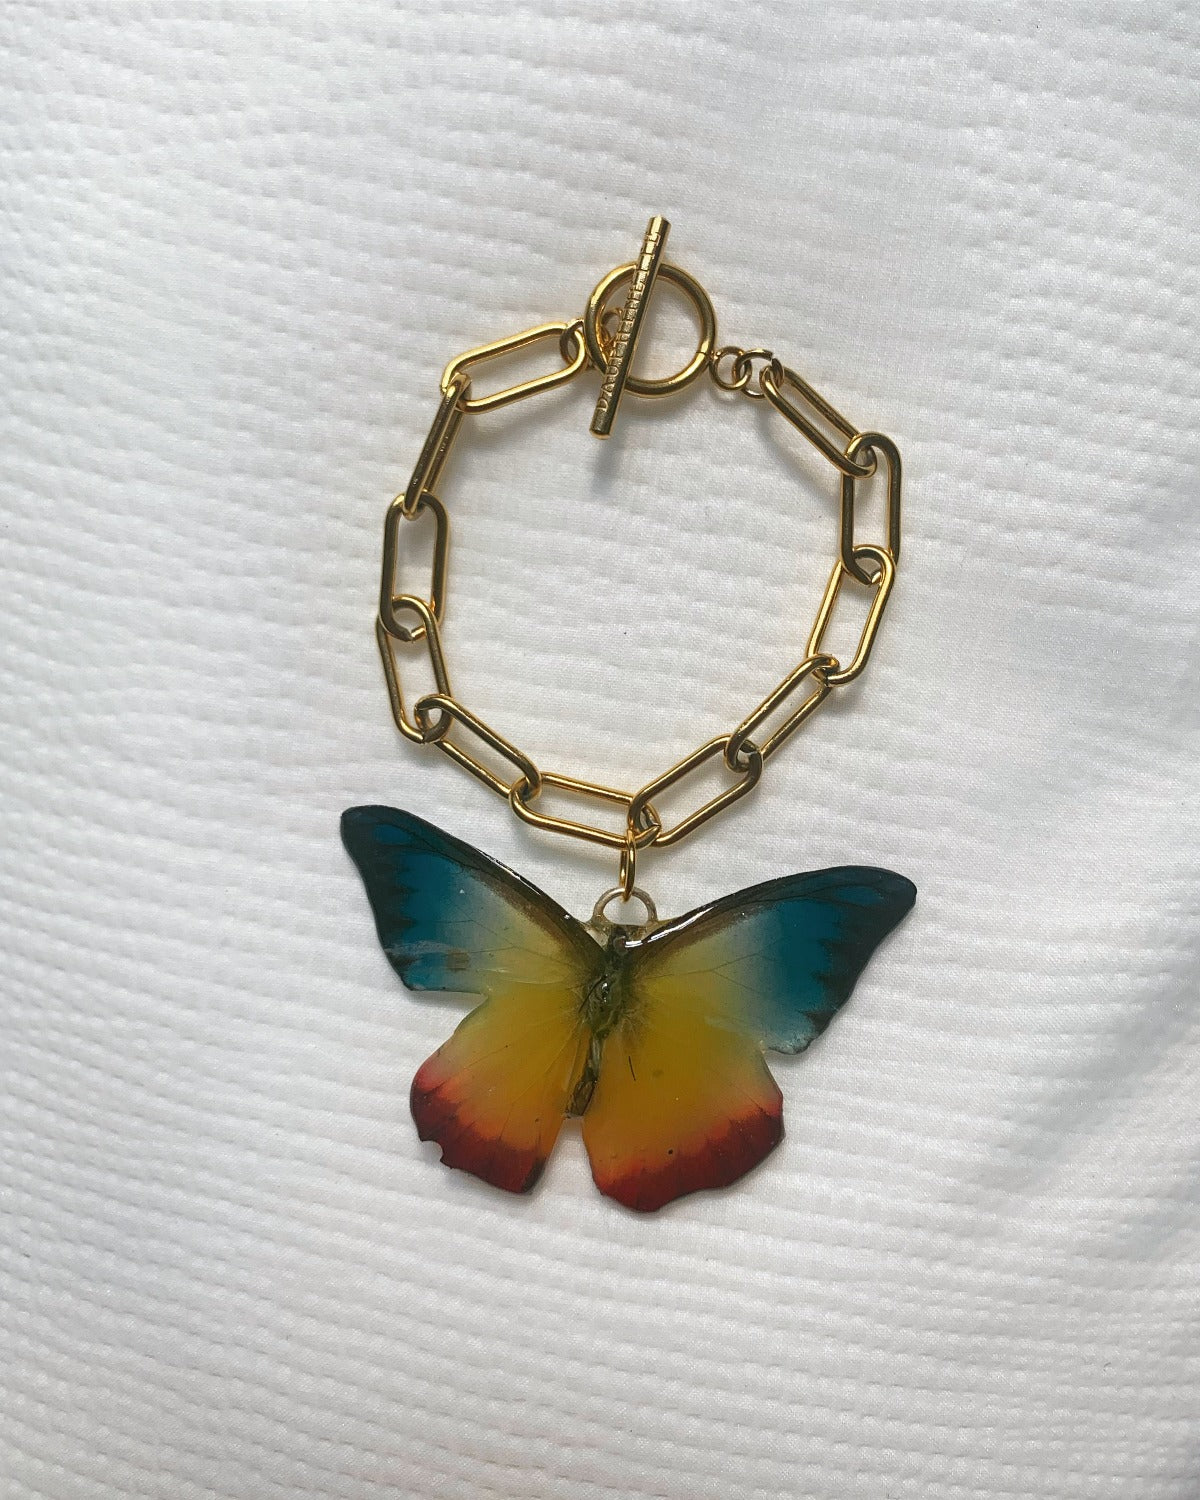 Red, Yellow, Blue, and Black Butterfly preserved in resin on gold bracelet chain.